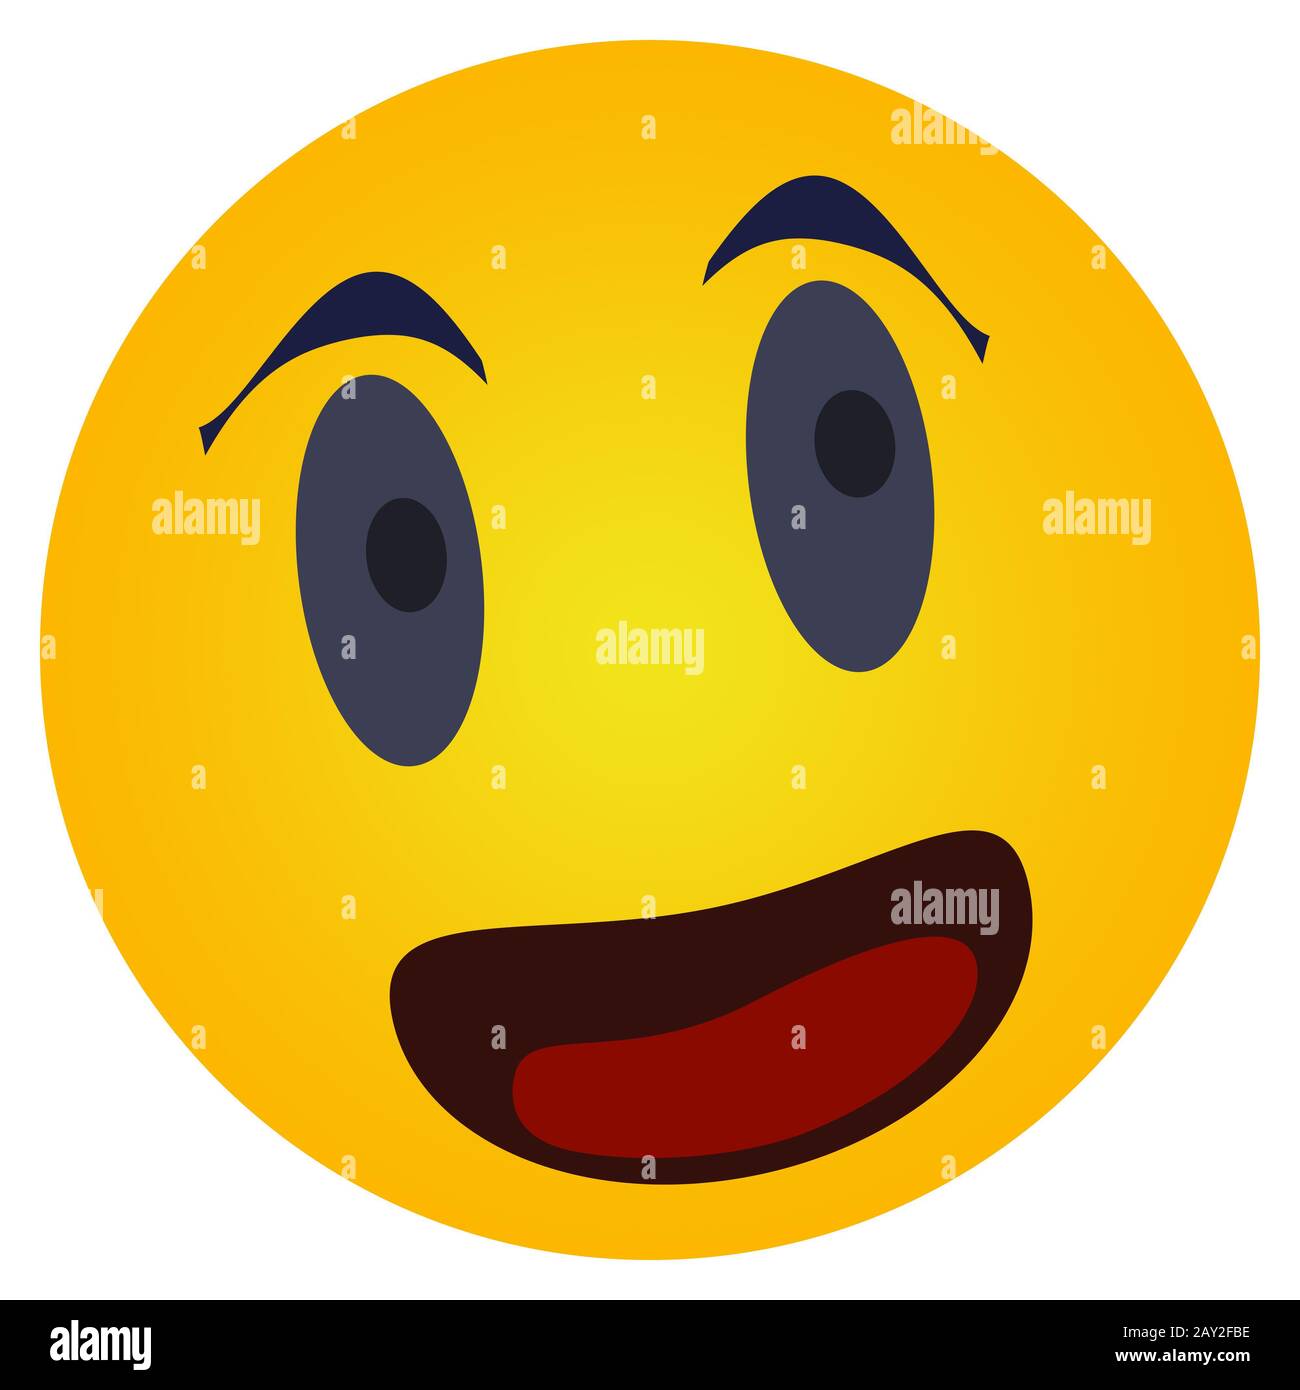 Round smiley icon, happy face looking away. Illustration of joyful expression of human face in the form of icon. Stock Photo